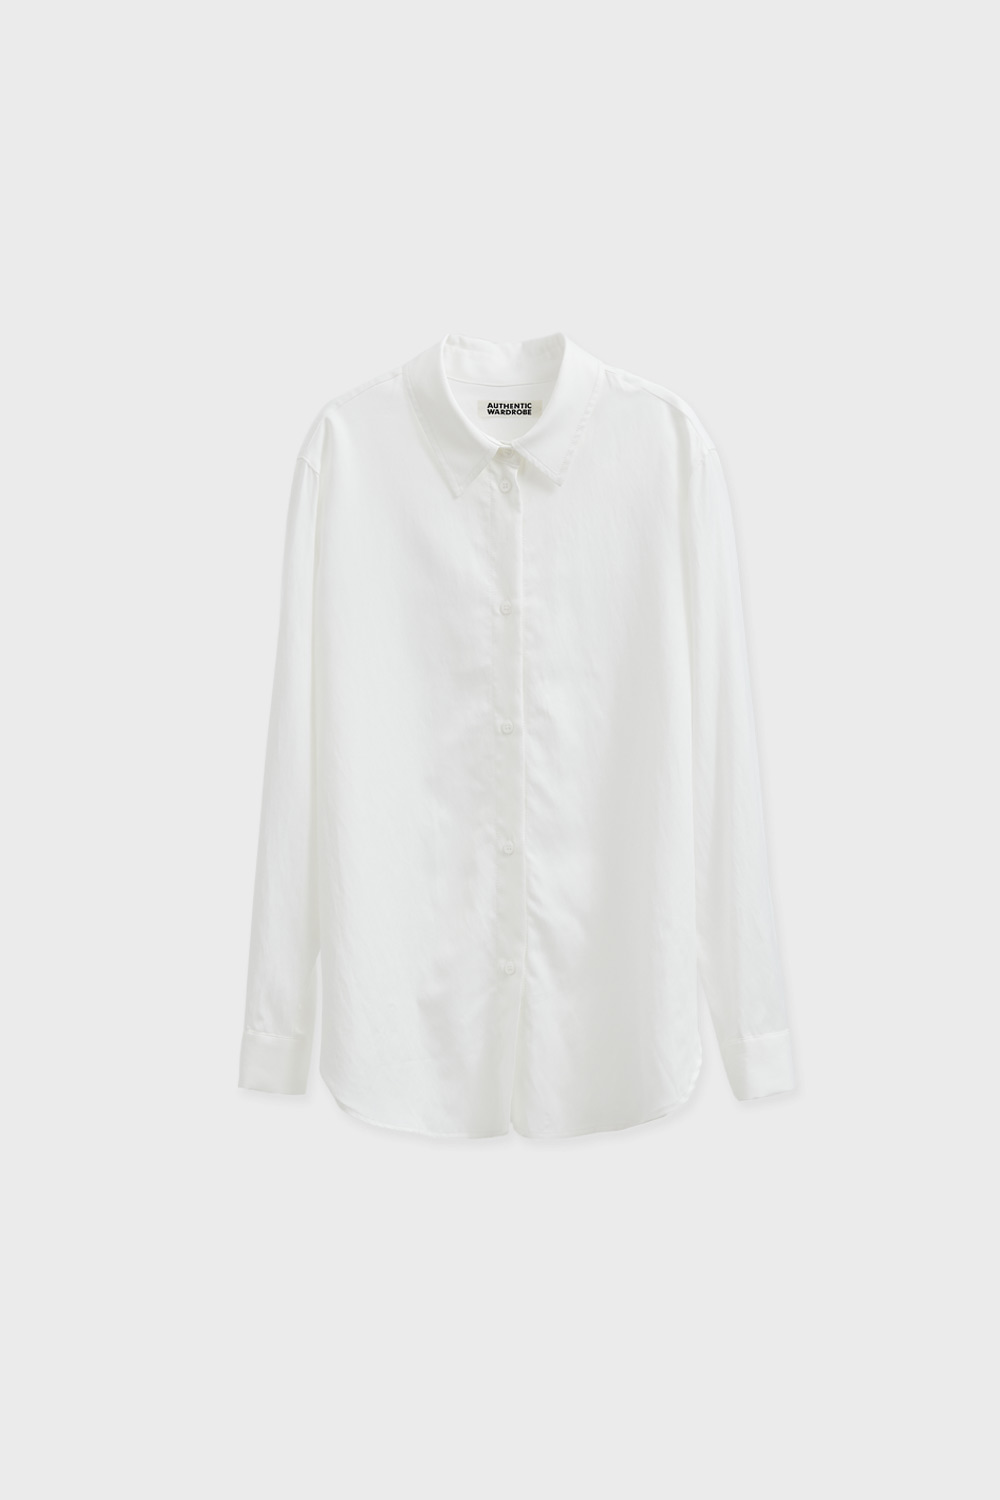 Essential Silky Fit Shirt